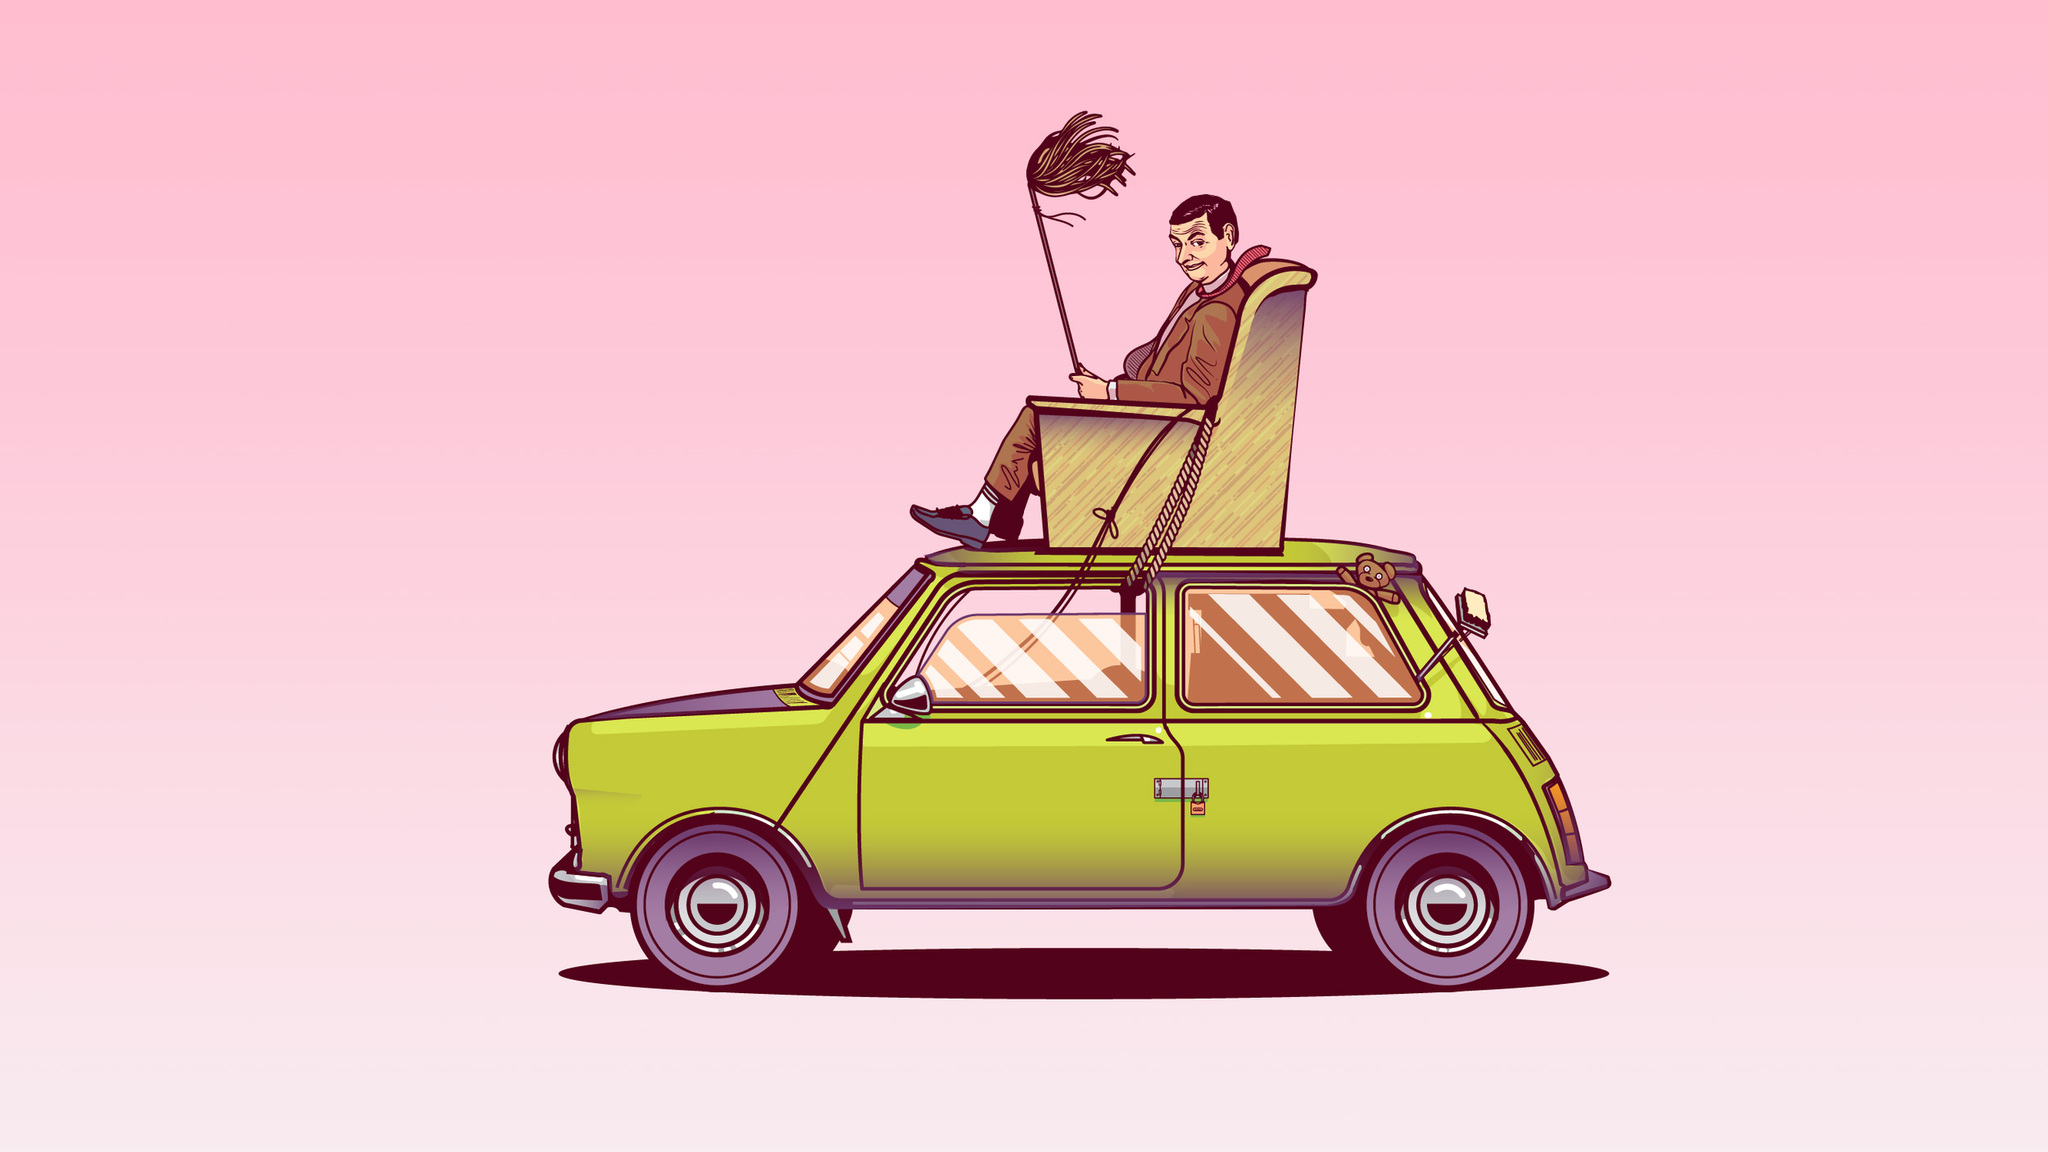 2048x1152 Mr Bean Sitting On Top Of His Car Vector Art ...